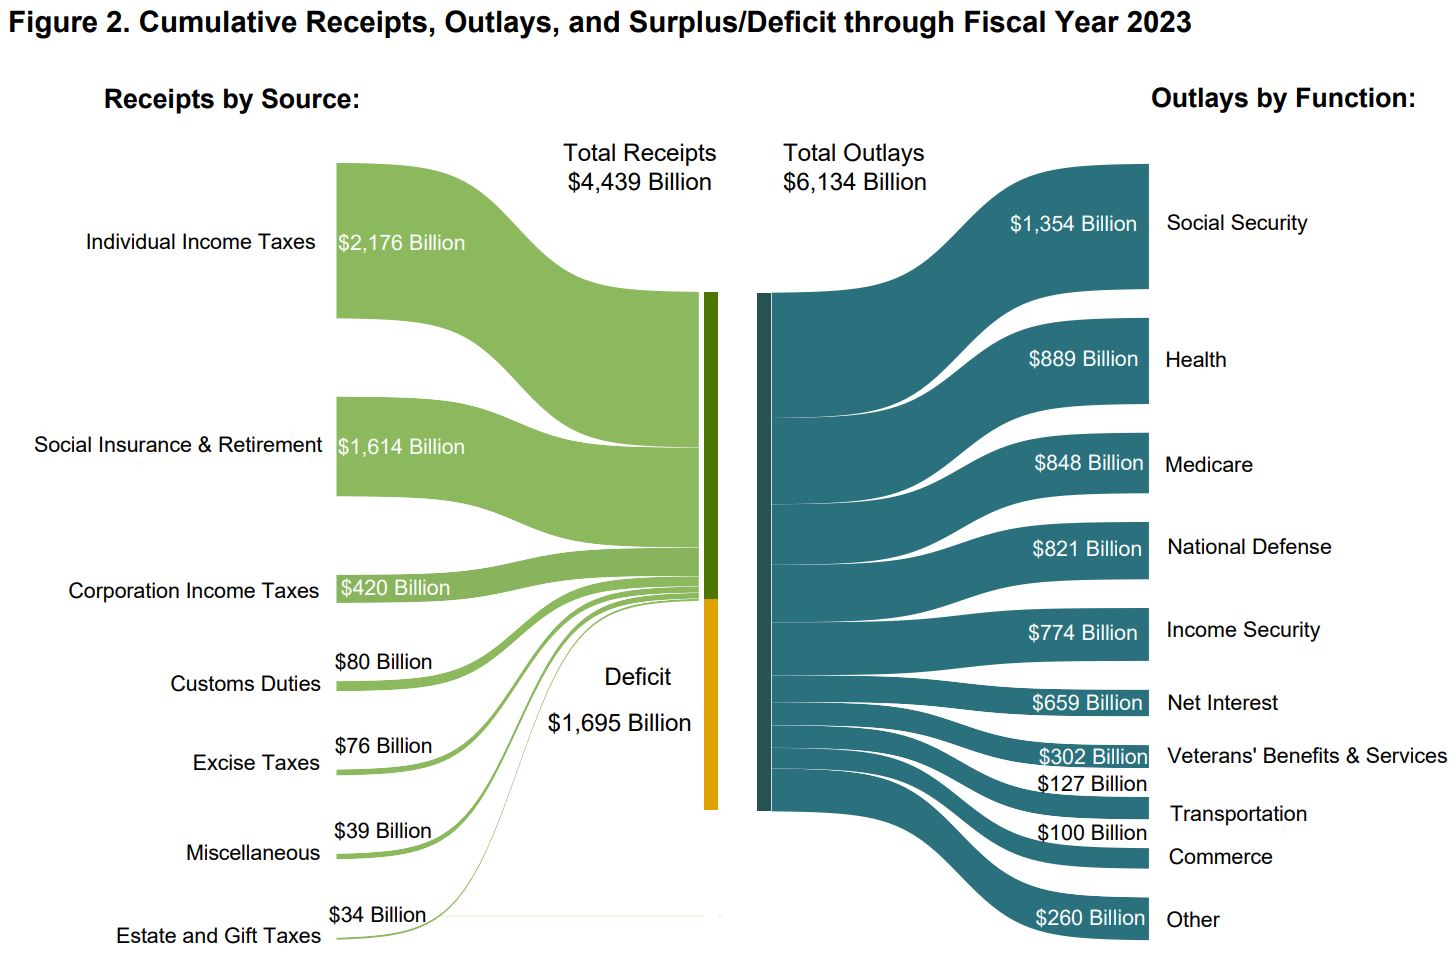 A sankey chart that shows the U.S. federal government receipts and outlays, demonstrating a $1.695 billion deficit against $4.439 billon of receipts and $6.134 billion of outlays.